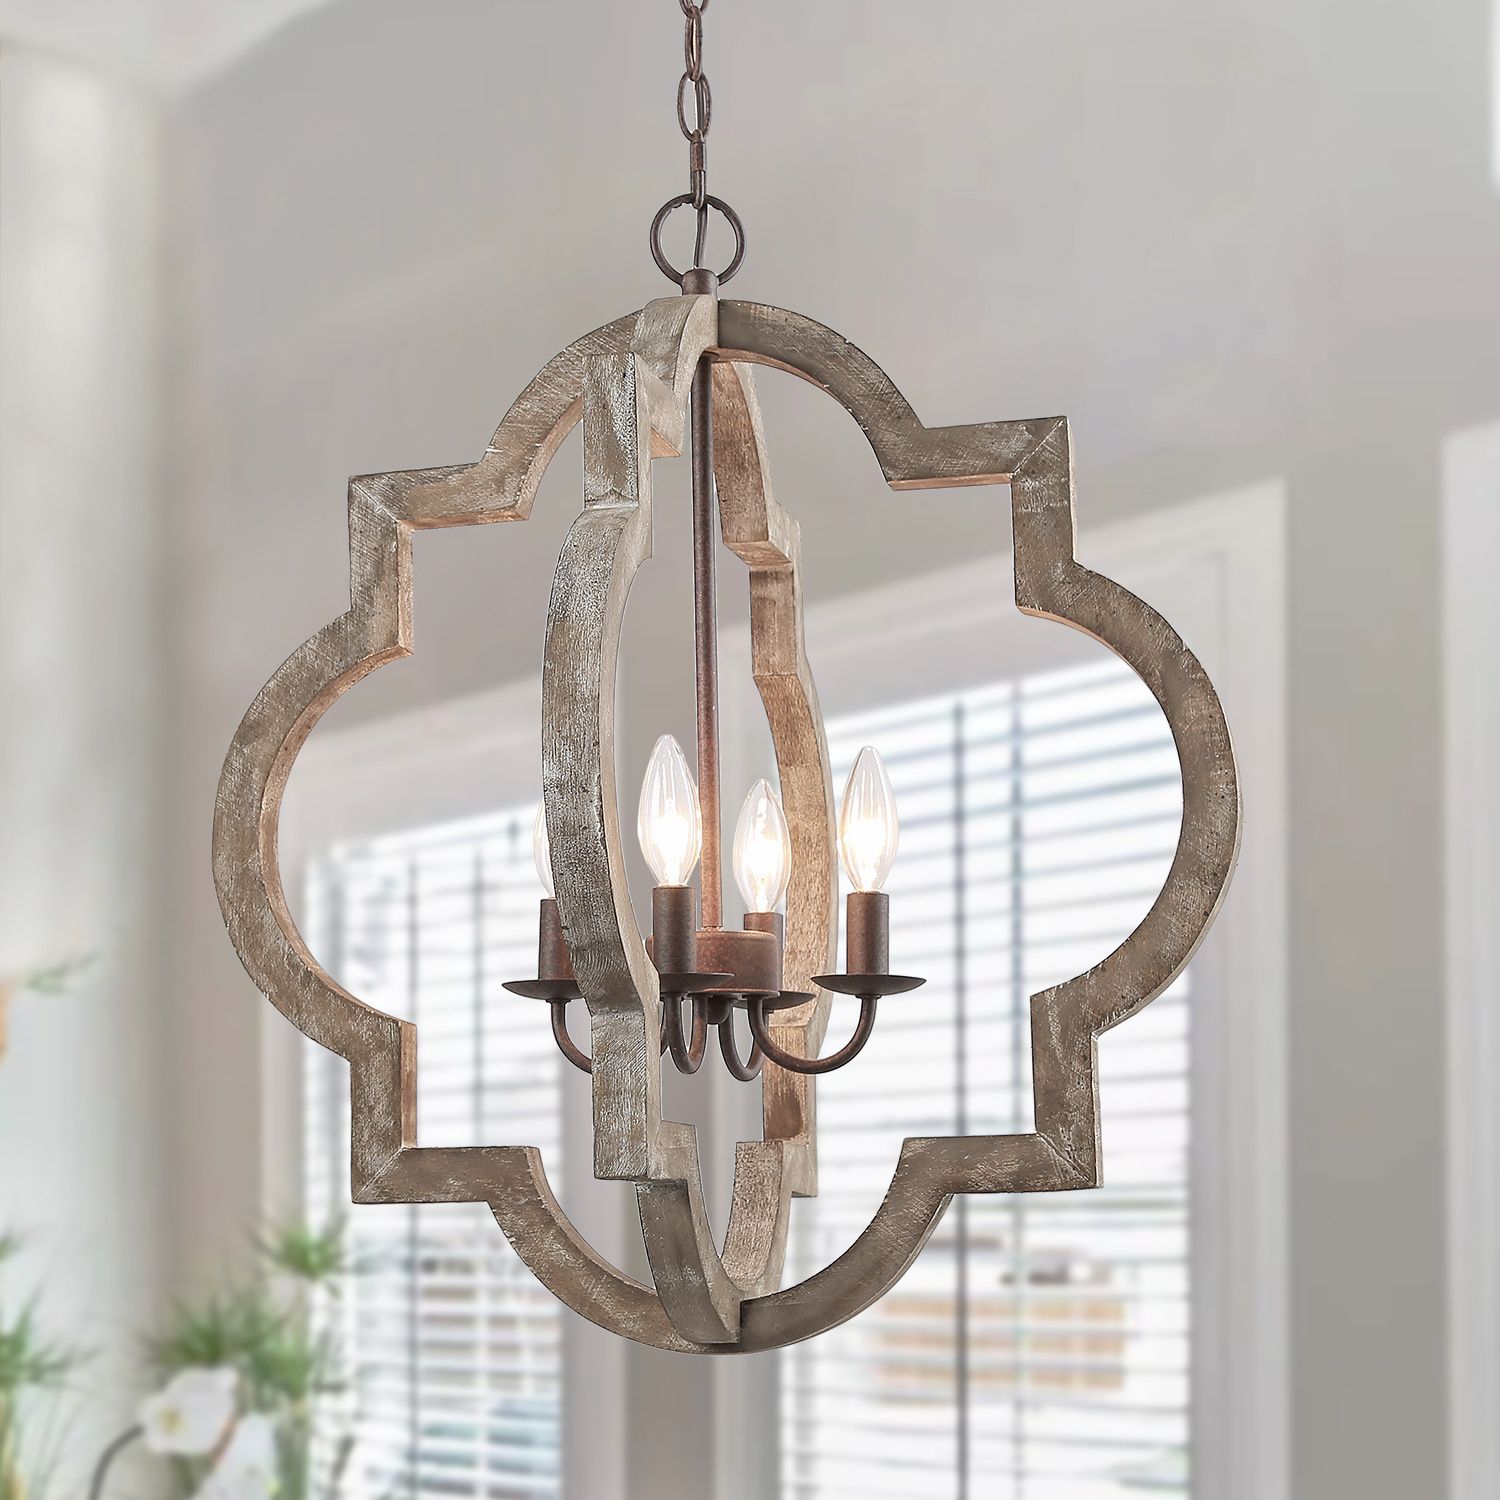 Lnc Farmhouse Lantern Chandelier, Handmade Wood 4 Light Fixtures Hanging  For Dining,living Room – Walmart In Cream And Rusty Lantern Chandeliers (Photo 8 of 15)